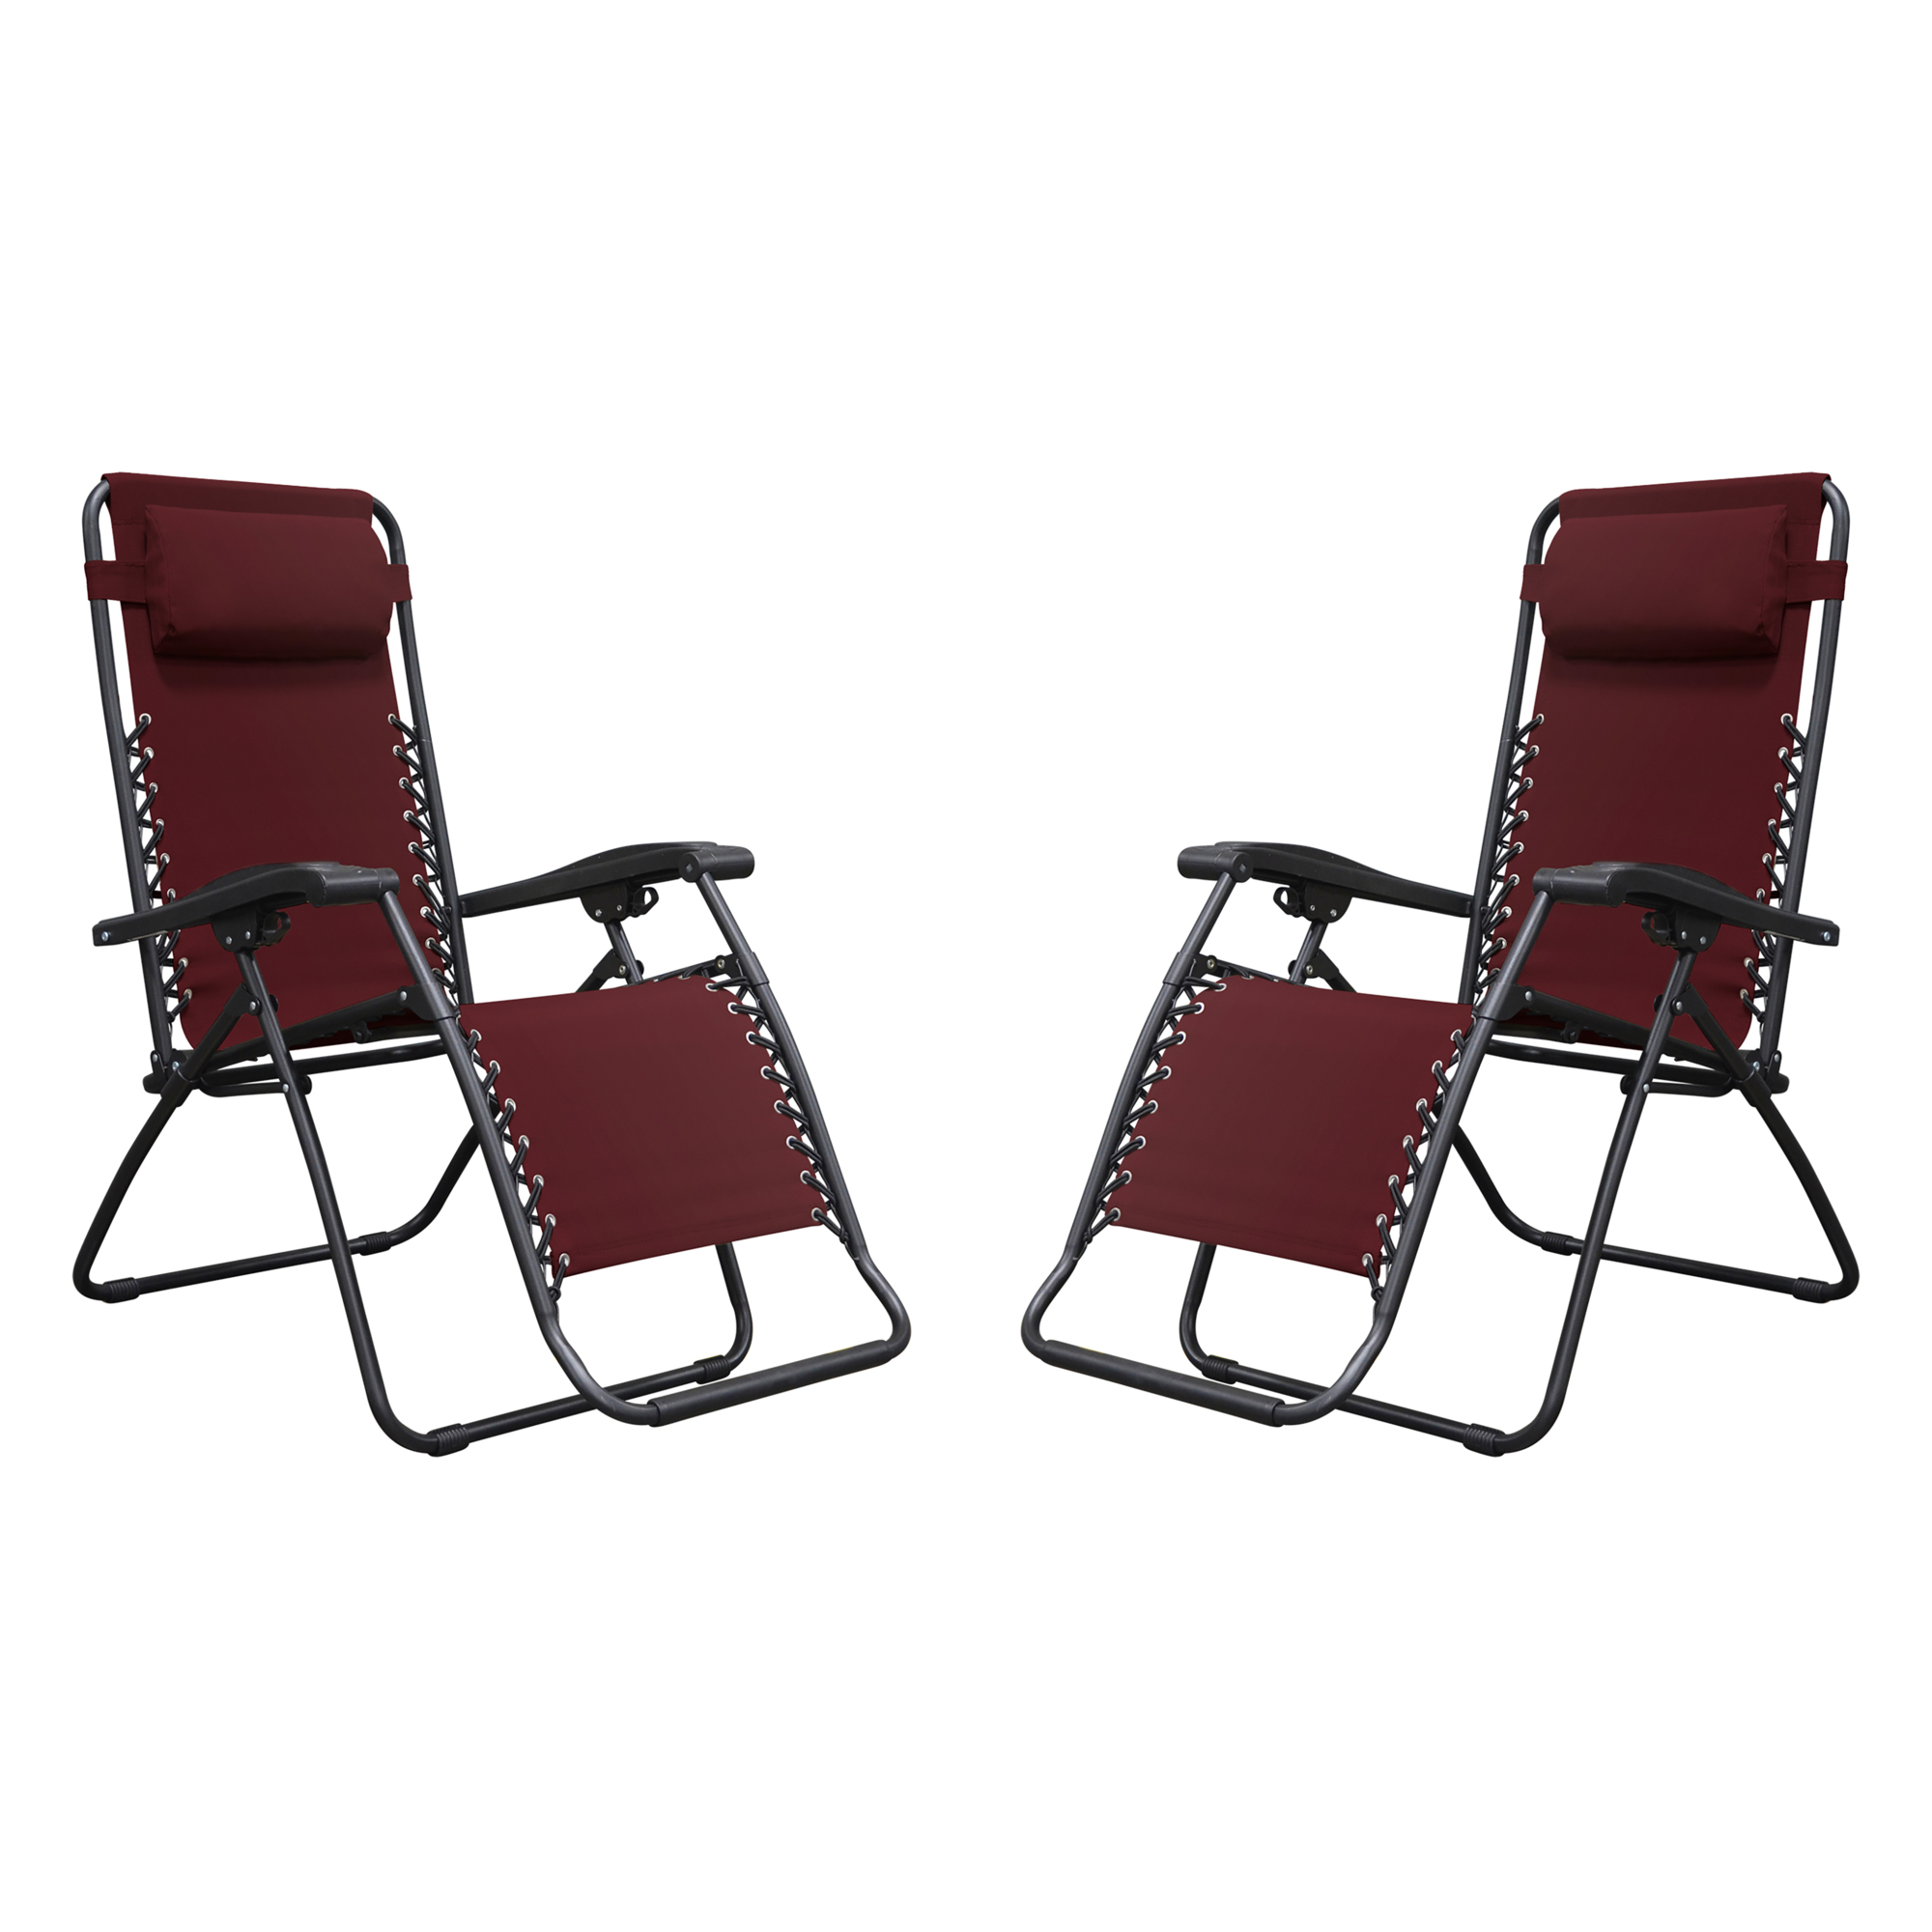 Caravan Canopy, Infinity Zero Gravity Chair Lounger 2 Pack, Primary Color Burgundy, Material Textile, Width 27.16 in, Model 80009000172